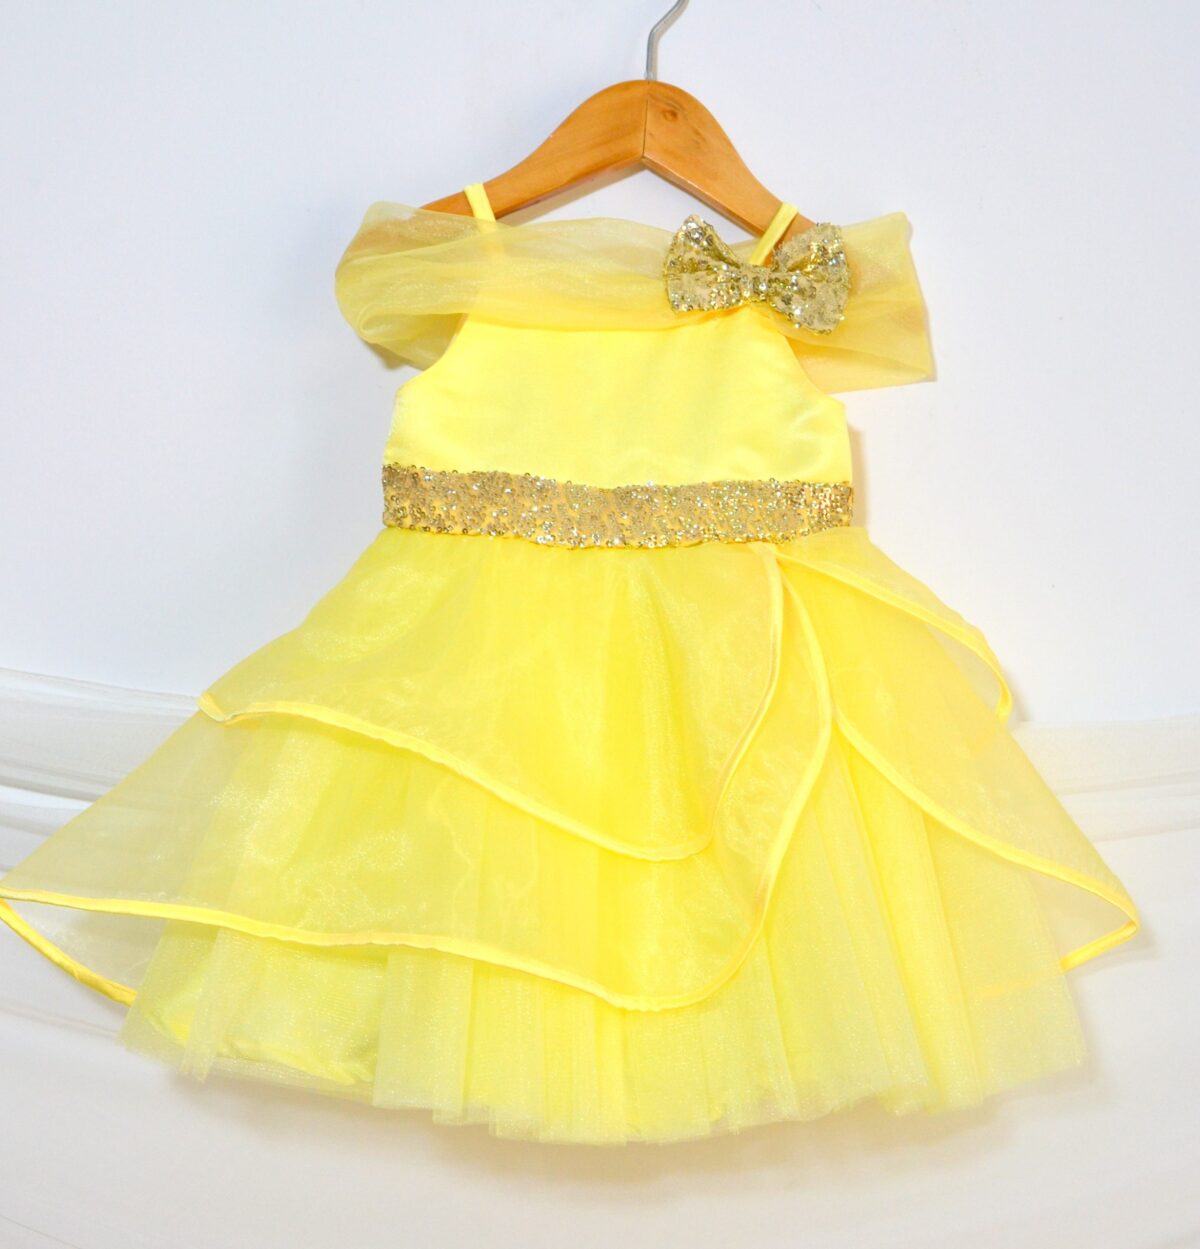 DSC 0070 scaled TBT Off-Shoulder organza layered gown- Yellow